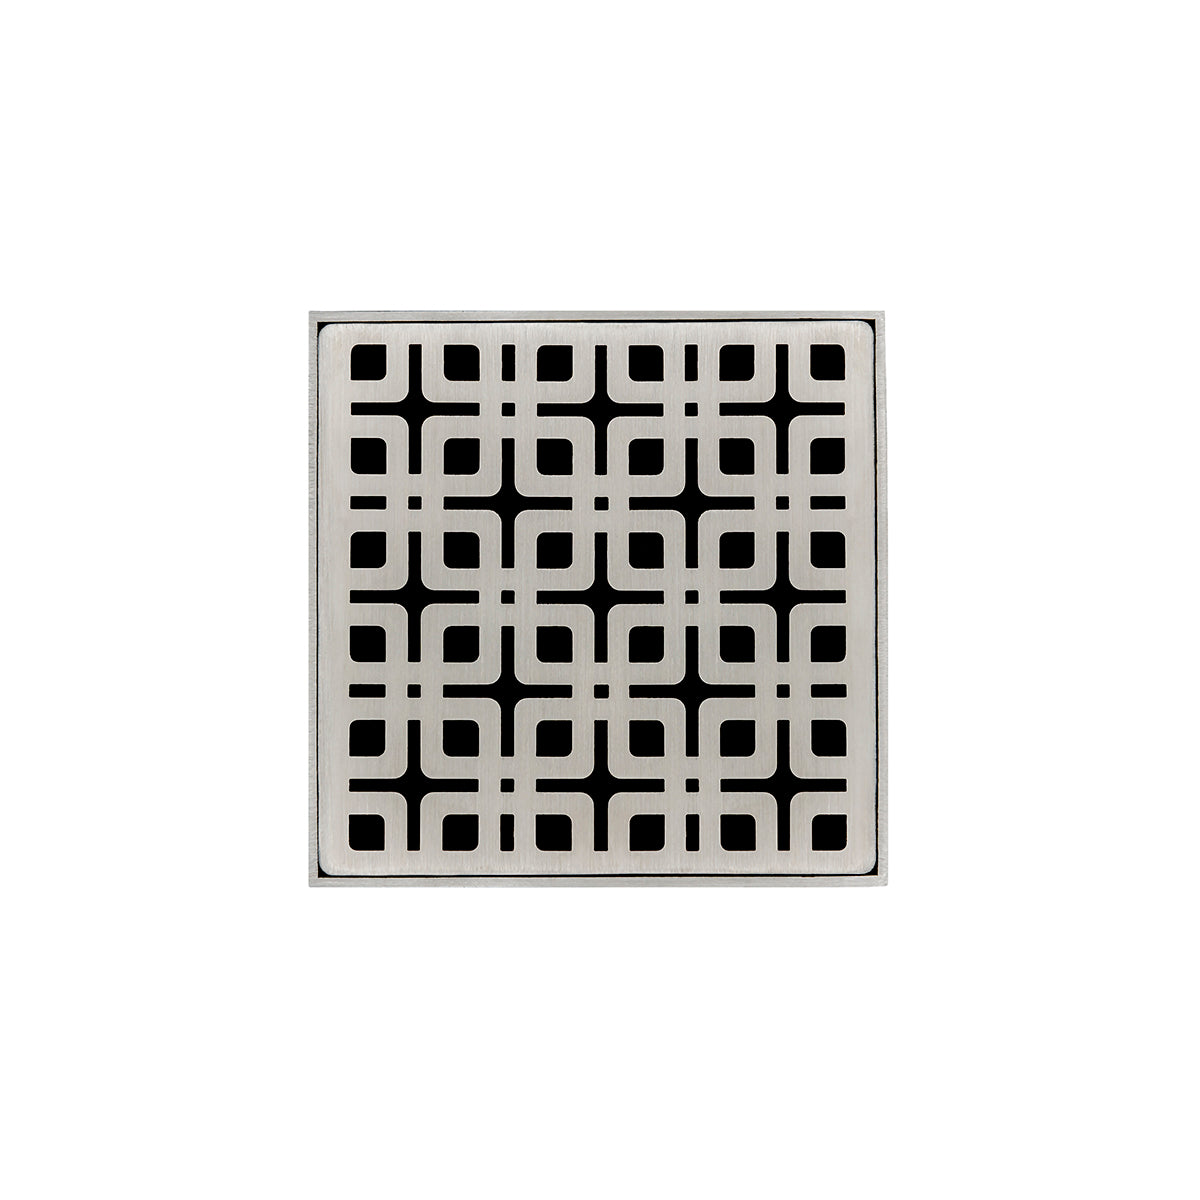 Infinity Drain 4" x 4" KDB 4 Premium Center Drain Kit with Link Pattern Decorative Plate with Stainless Steel Bonded Flange Drain Body, 2" No Hub Outlet